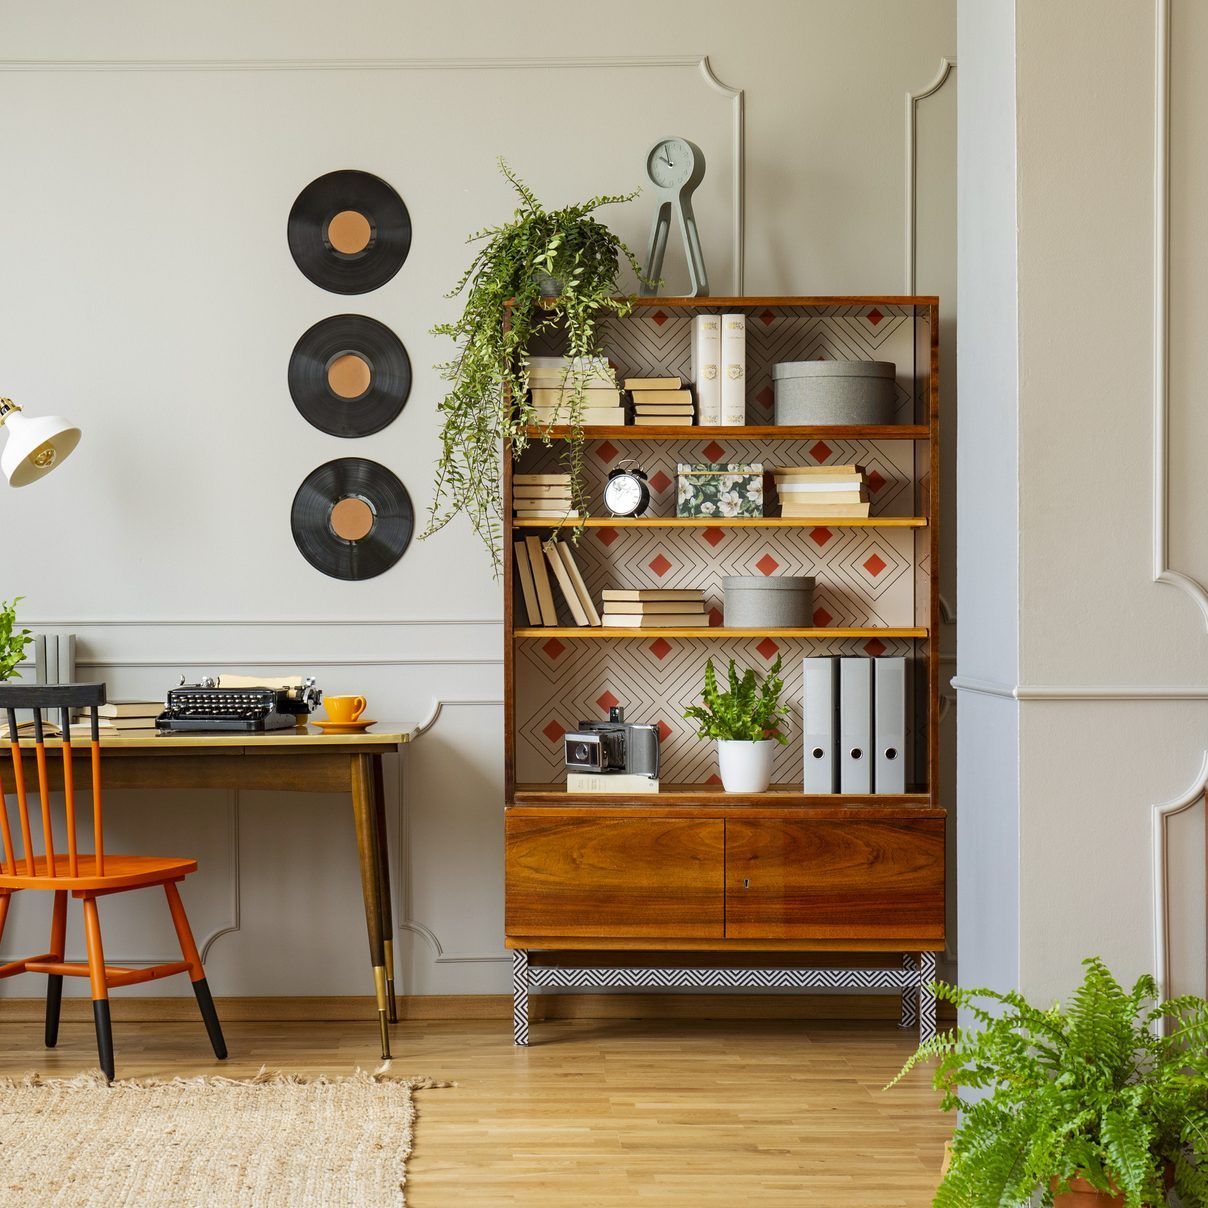 Vinyl records decorations on a gray wall with molding and wooden furniture in a retro home office interior for a writer. Real photo.